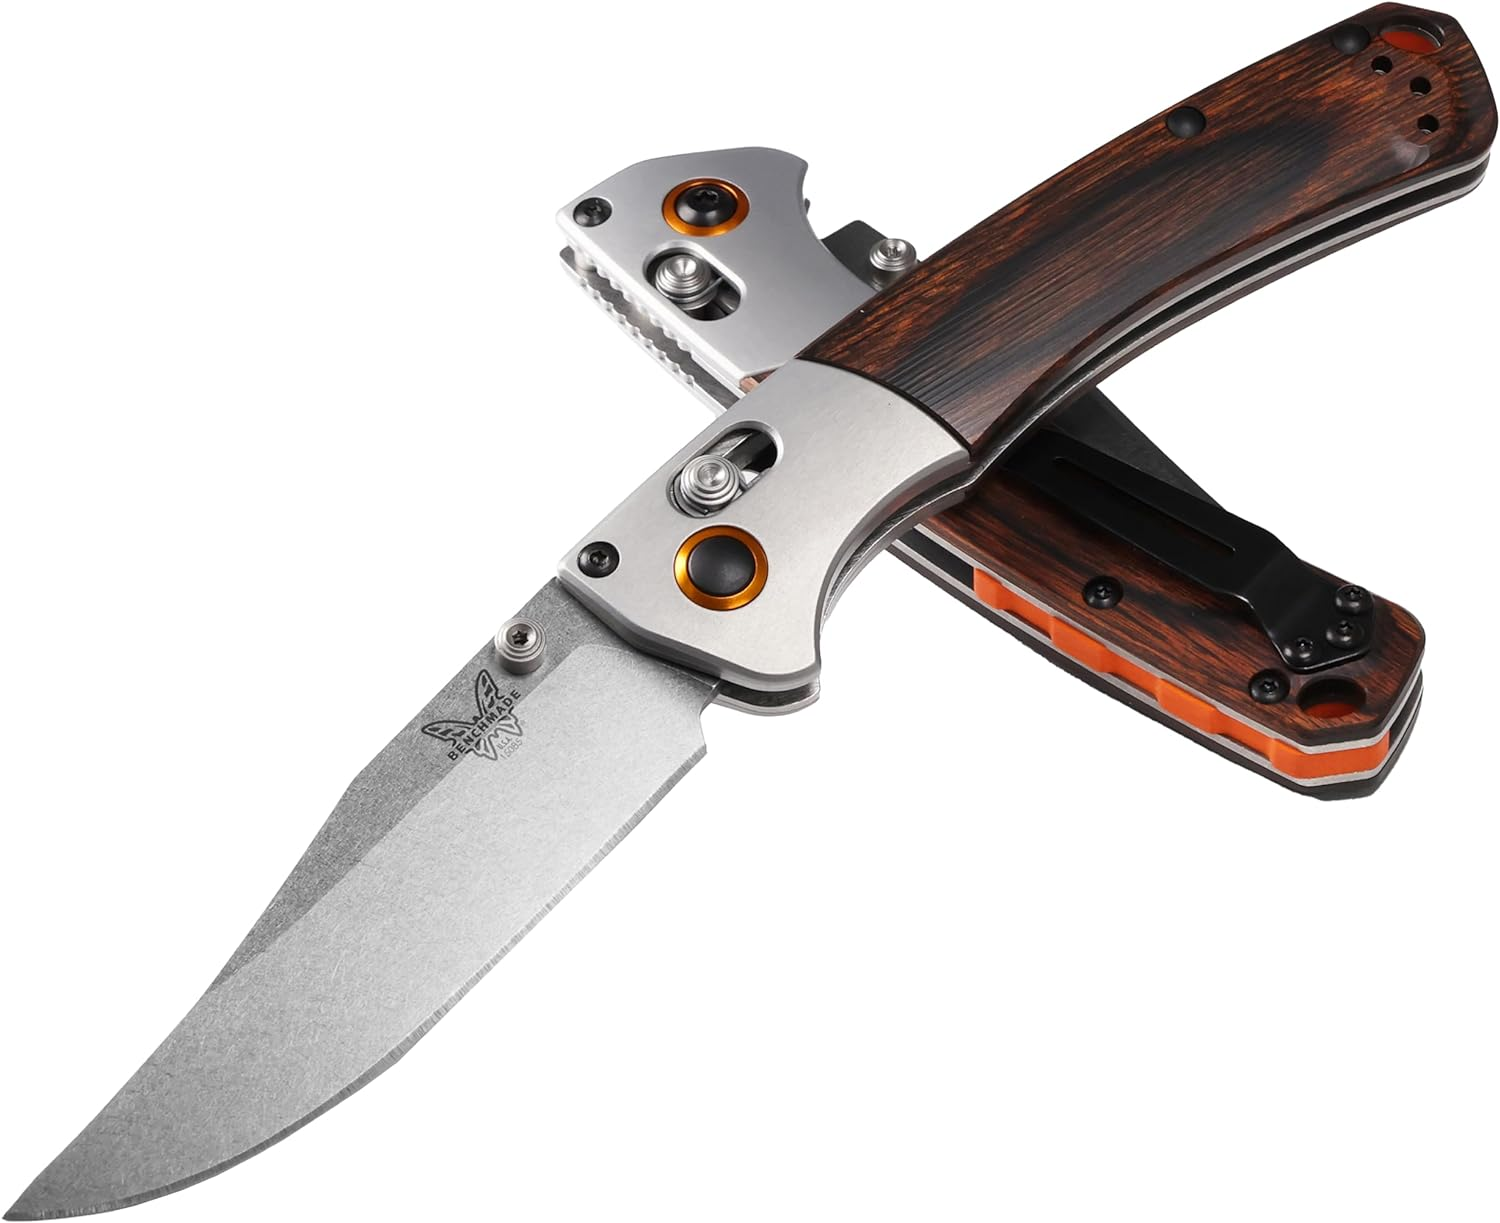 Benchmade Crooked River 15085-2: Dimensional Excellence in Every Cut